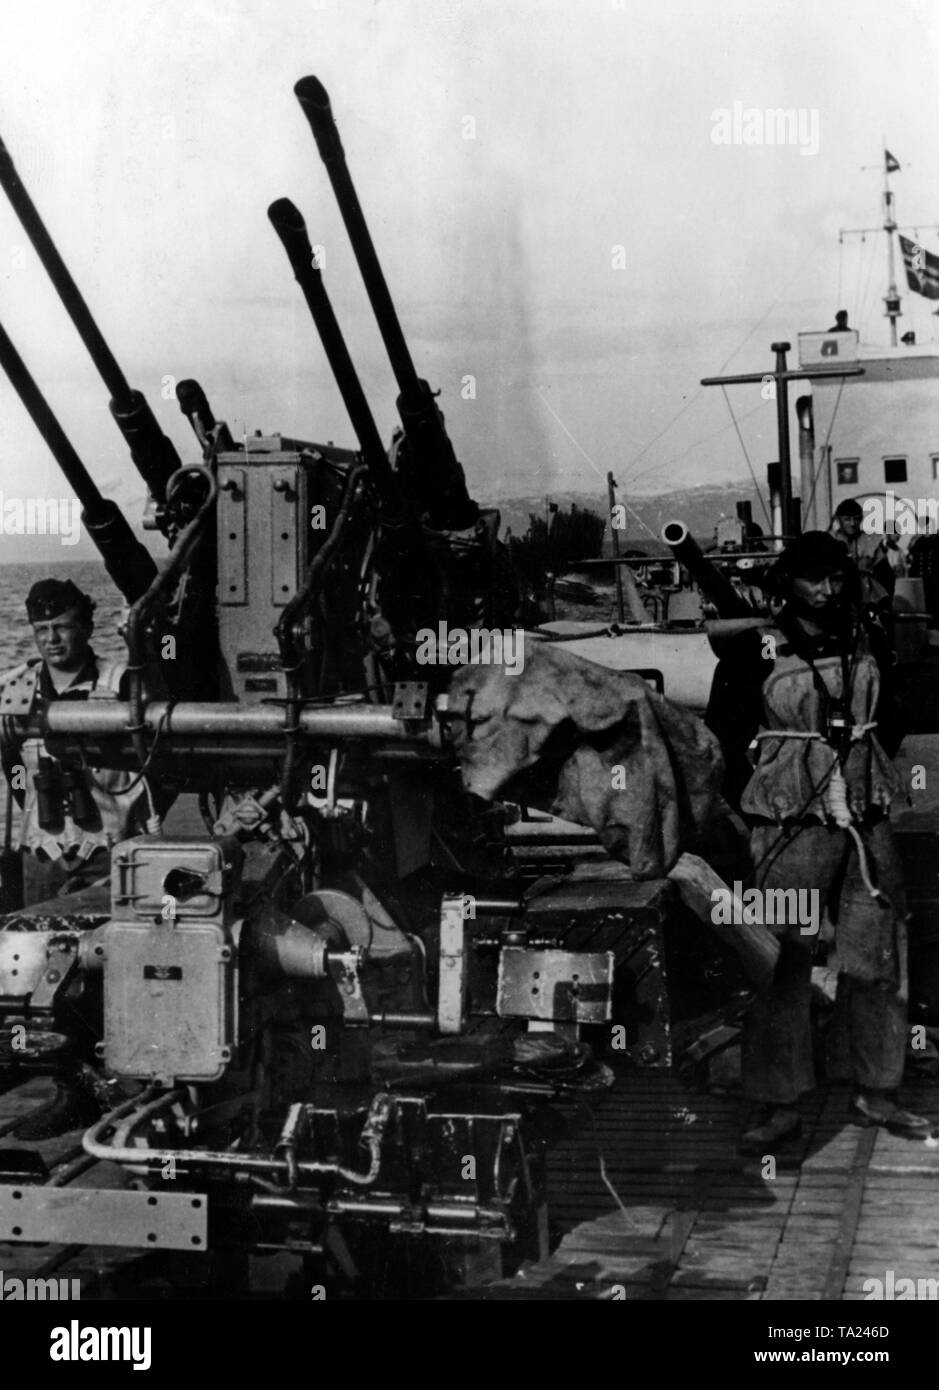 A Flak Vierling 38 (2 cm Flak Vierling 38) on a German warship in the Arctic Ocean. In the background, the Norwegian coast. Photo of the Propaganda Company (PK): war correspondent Maltry. Stock Photo